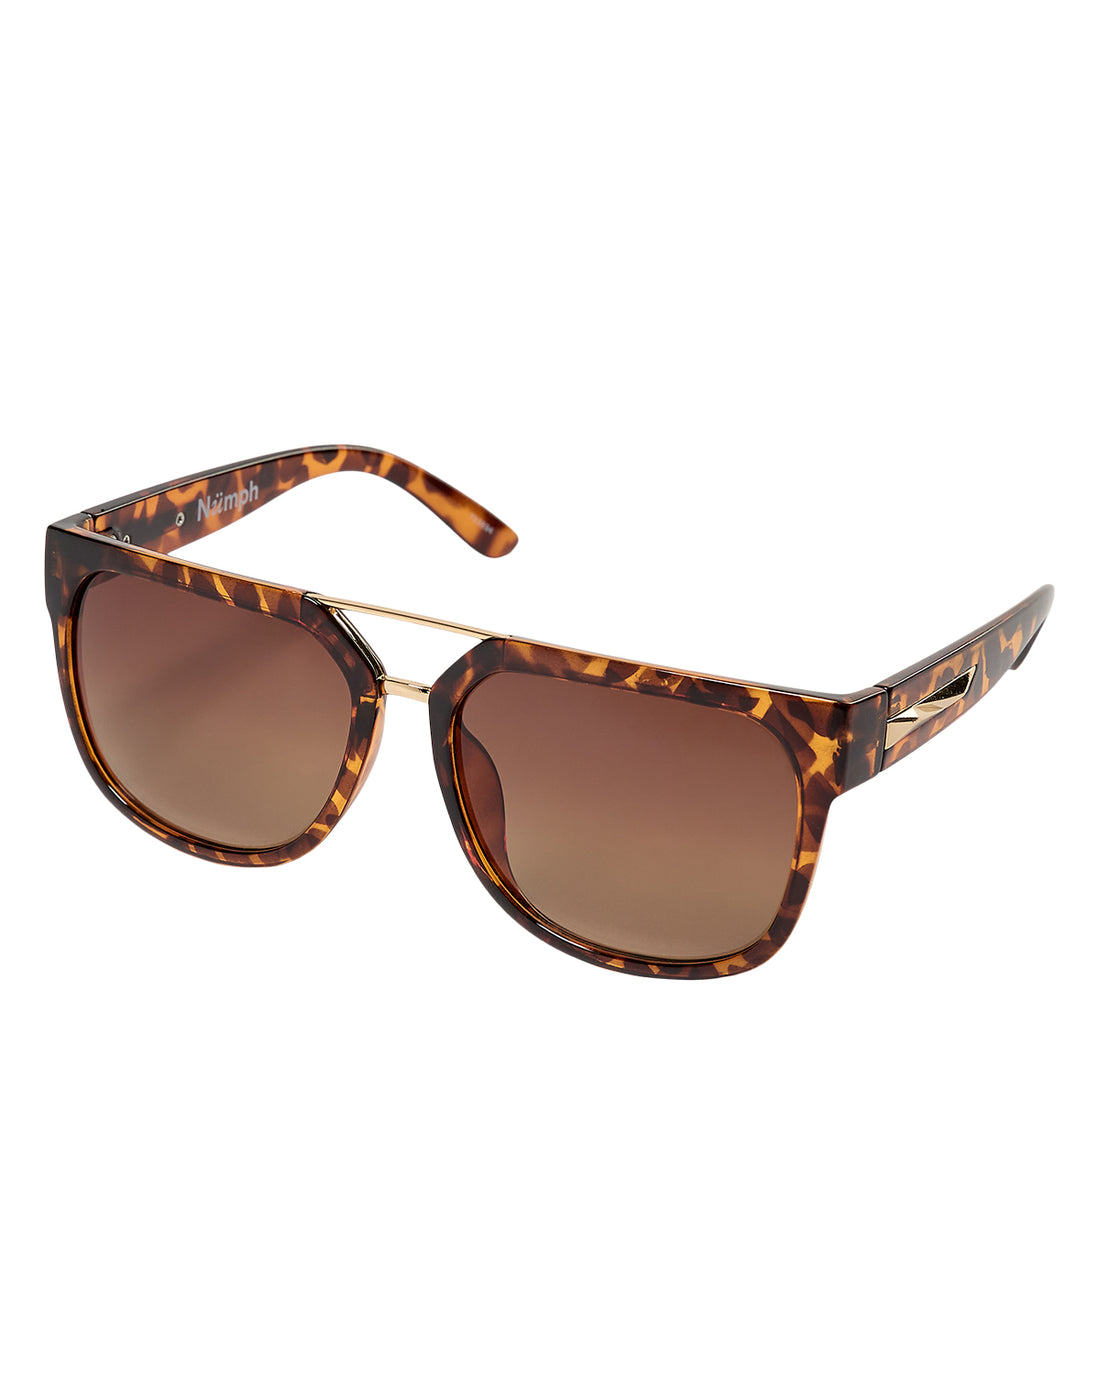 Nujoseph Tortoise Shell Sunglasses in Shell with Case